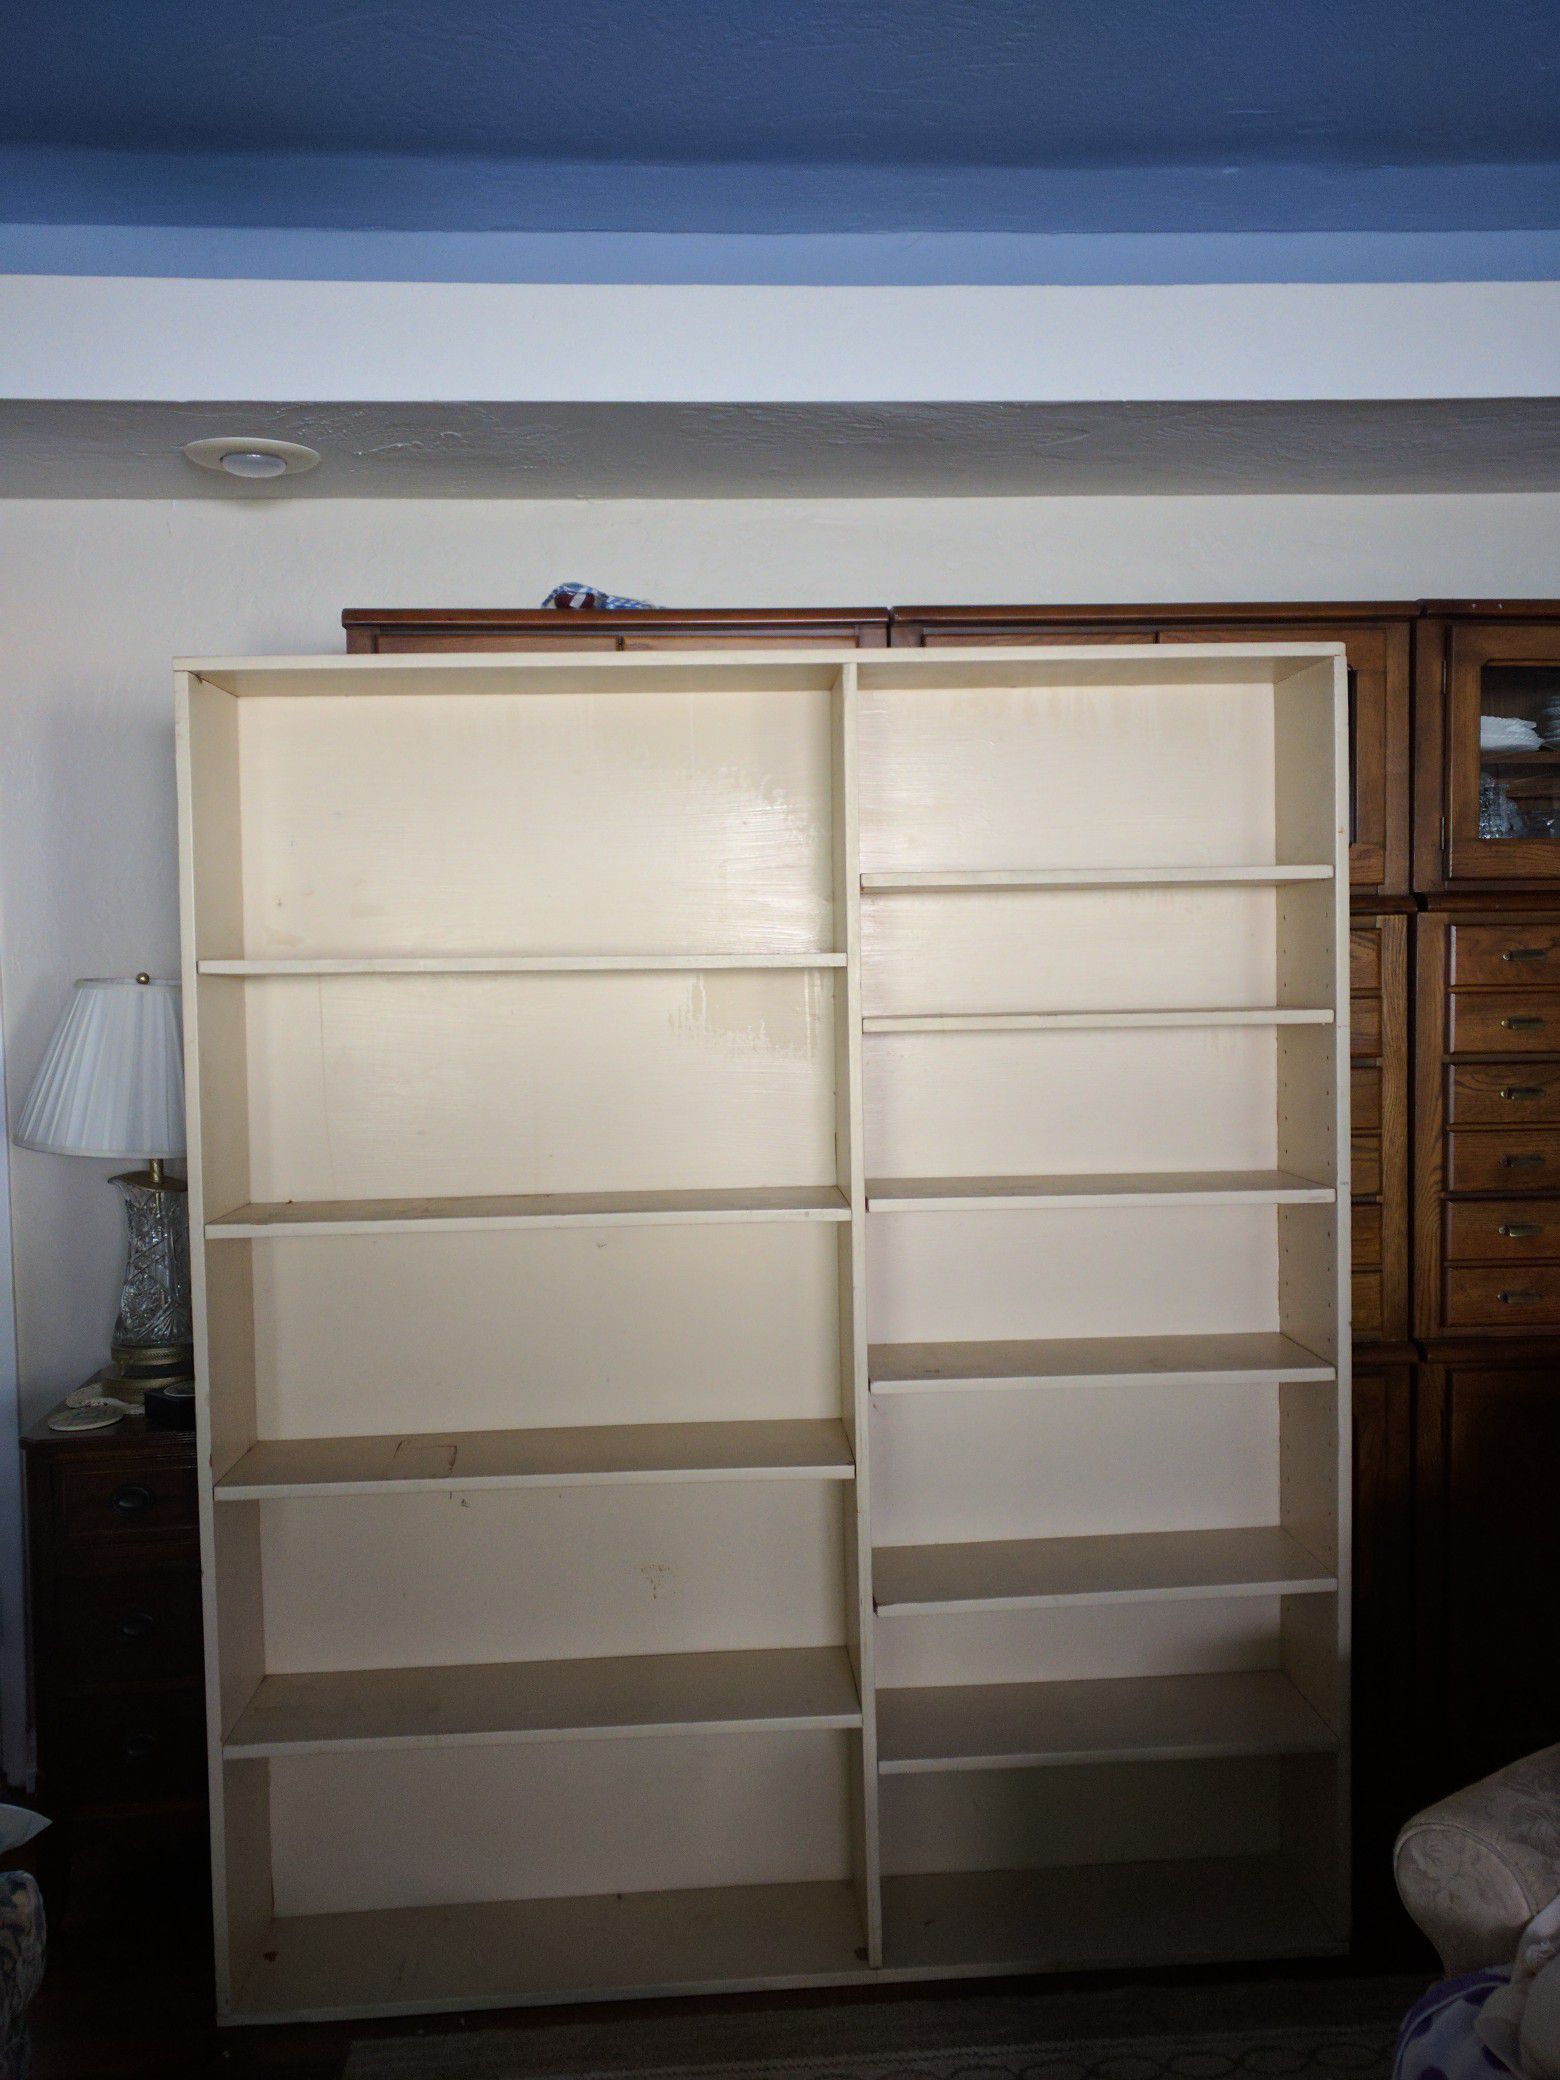 Bookcase or Storage Shelving